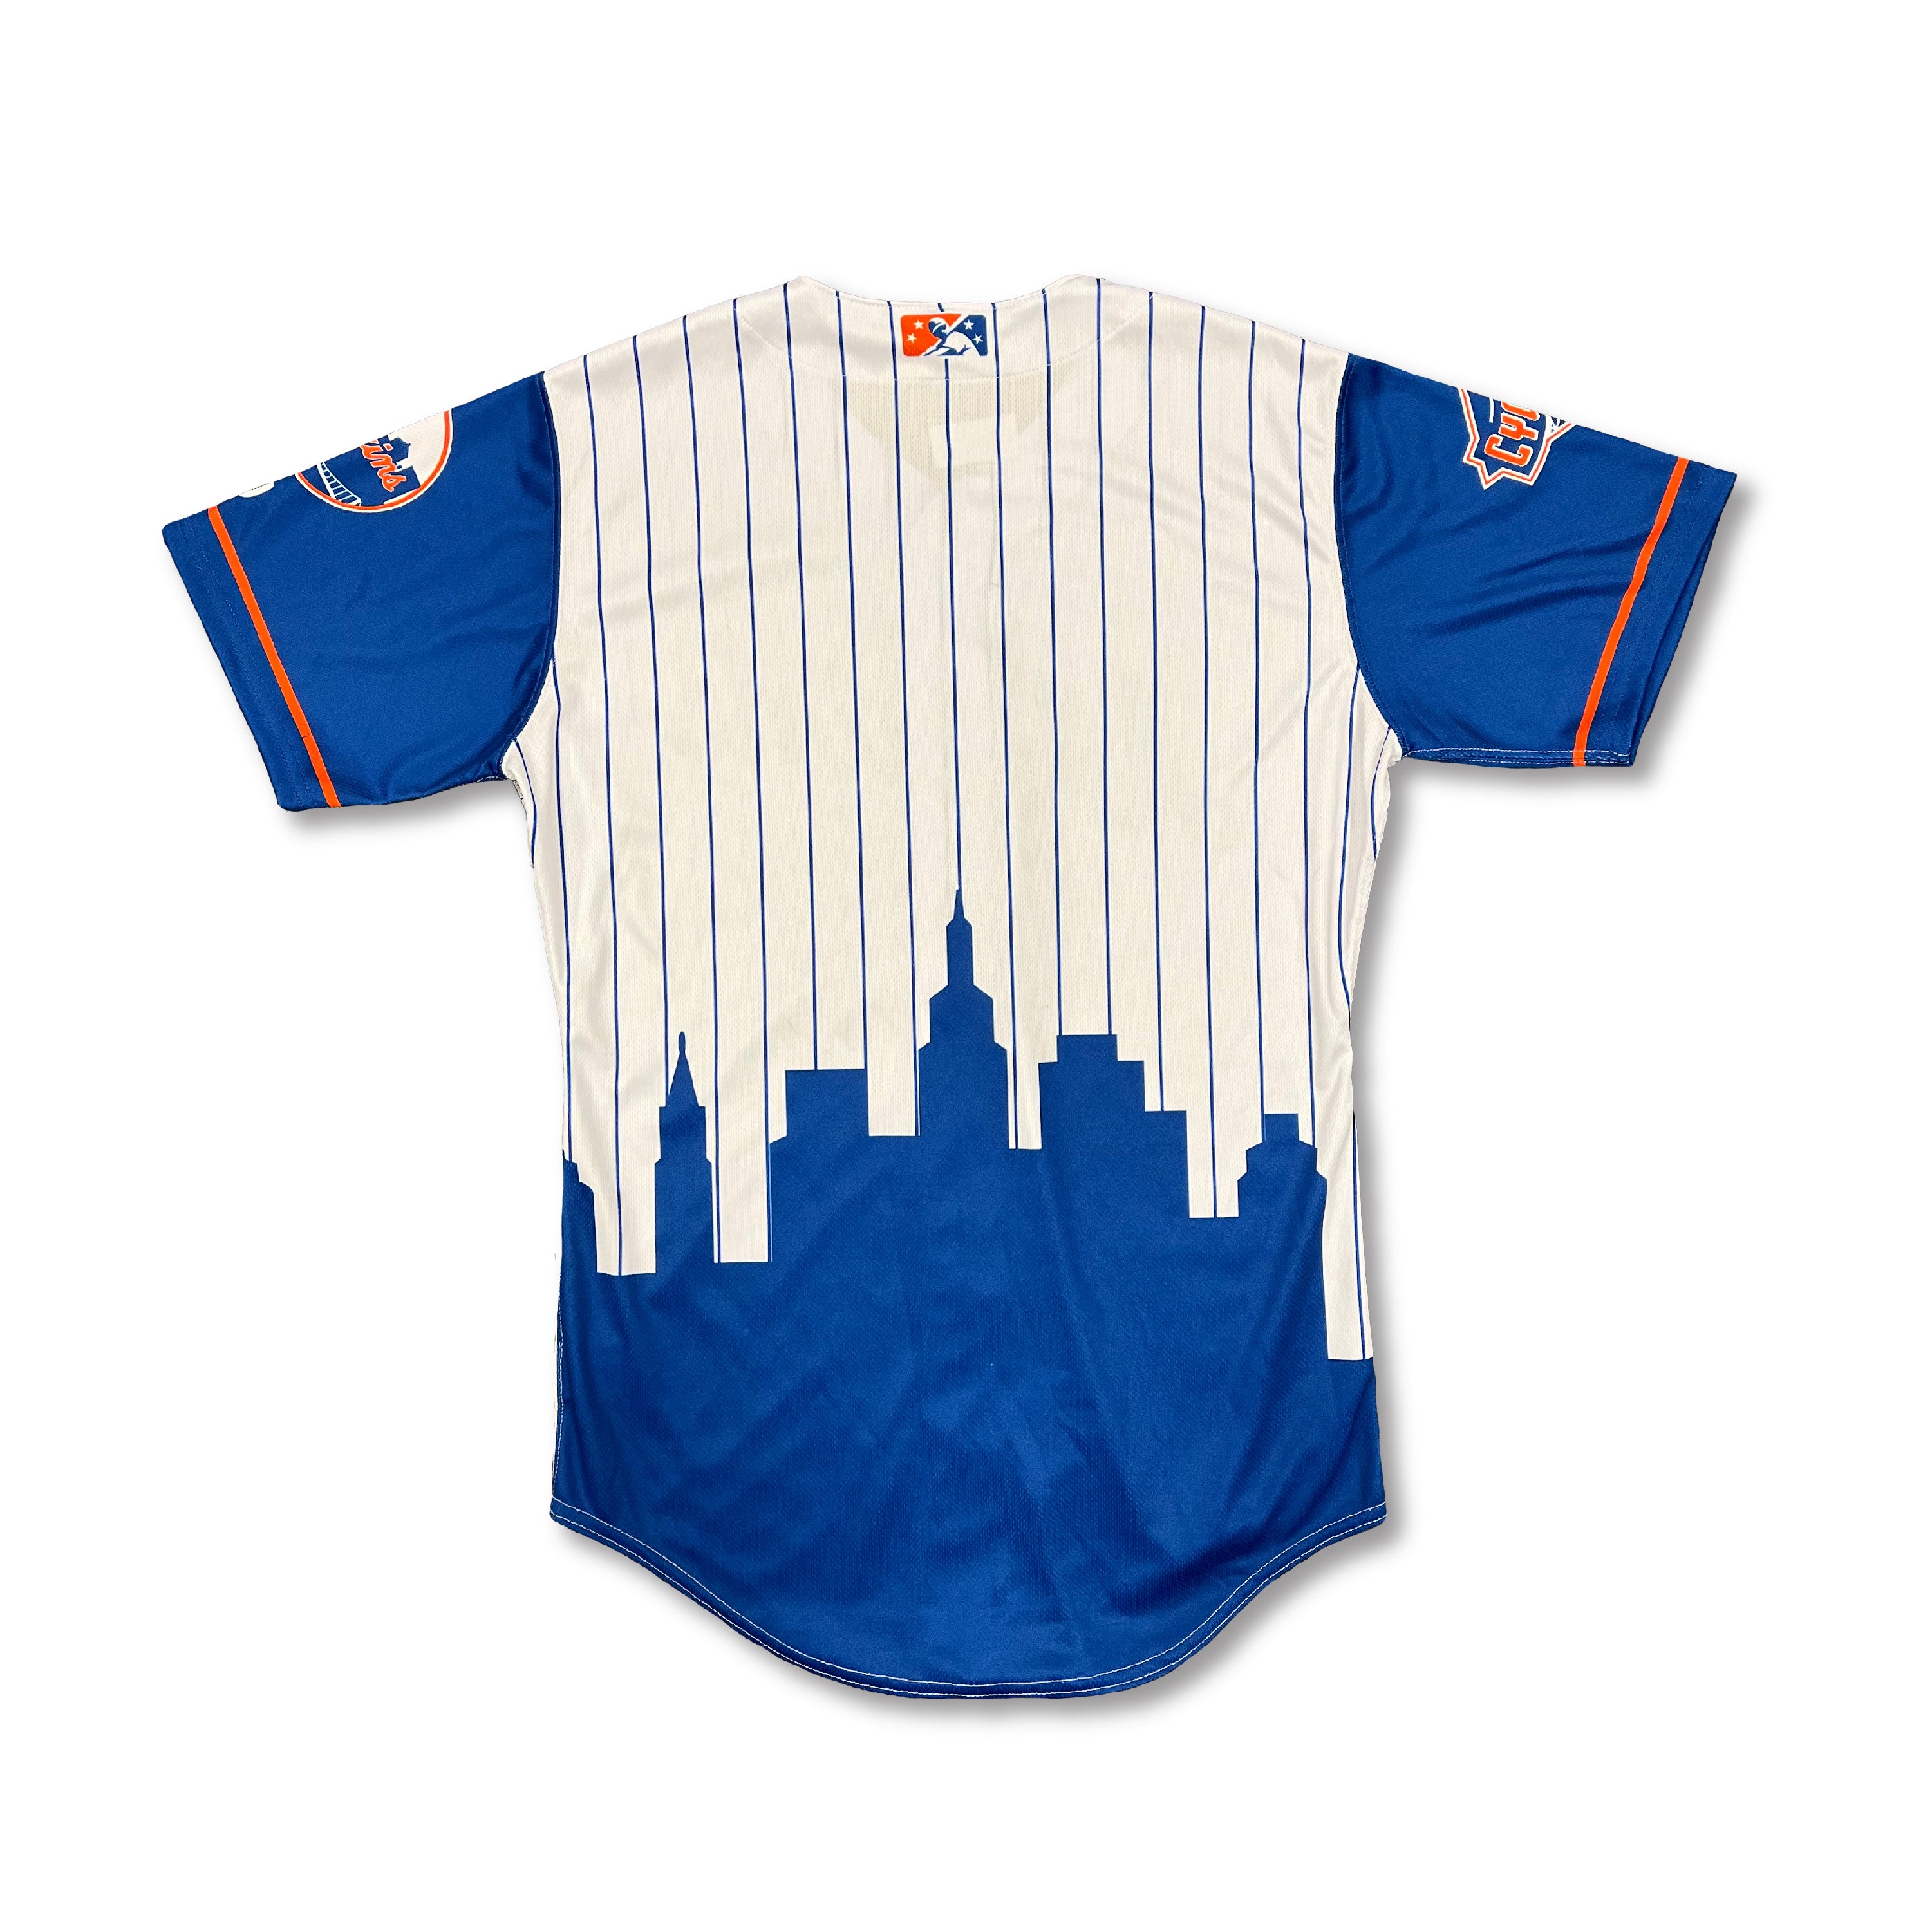 Shirts, New York Mets Throwback Jersey